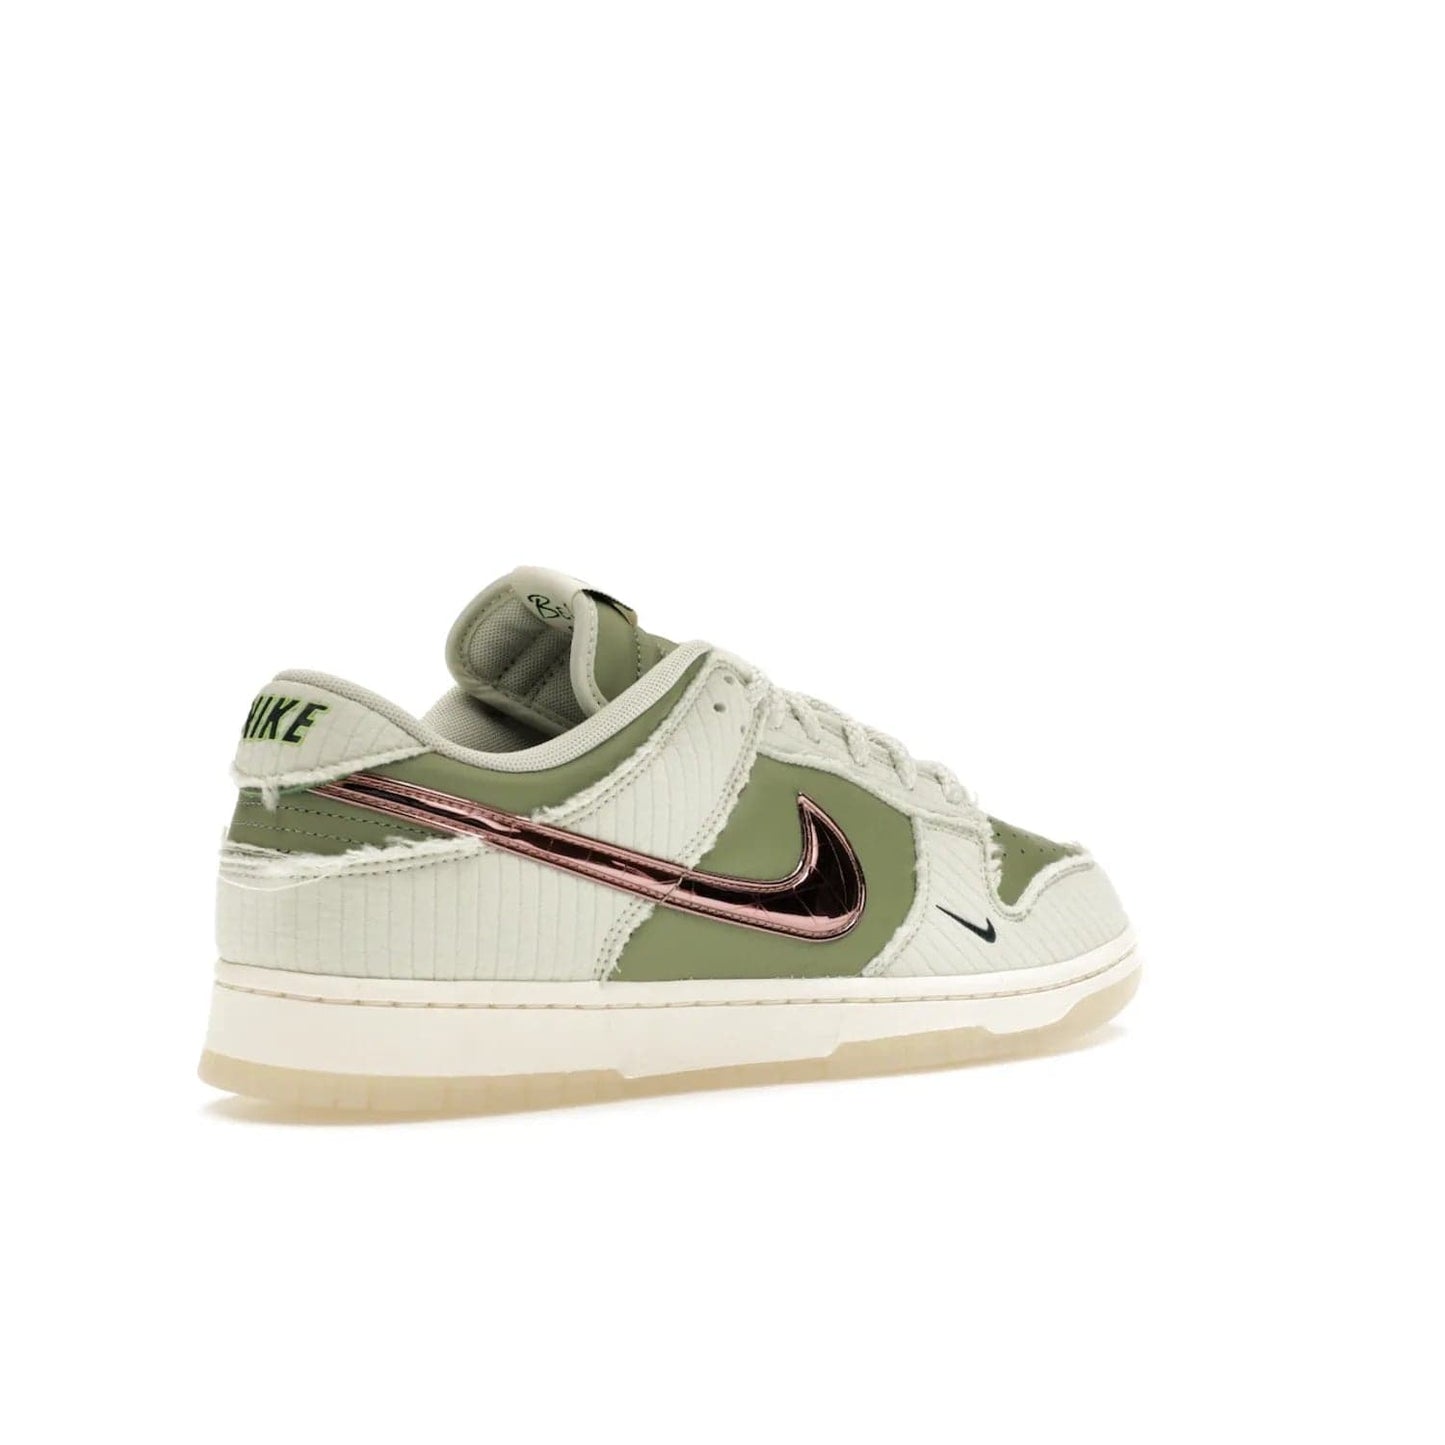 Nike Dunk Low Retro PRM Kyler Murray Be 1 of One - Image 33 - Only at www.BallersClubKickz.com - Introducing the Nike Dunk Low Retro PRM Kyler Murray "Be 1 of One"! A Sea Glass upper with Sail and Oil Green accents, finished with Rose Gold accents. Drop date: November 10th.